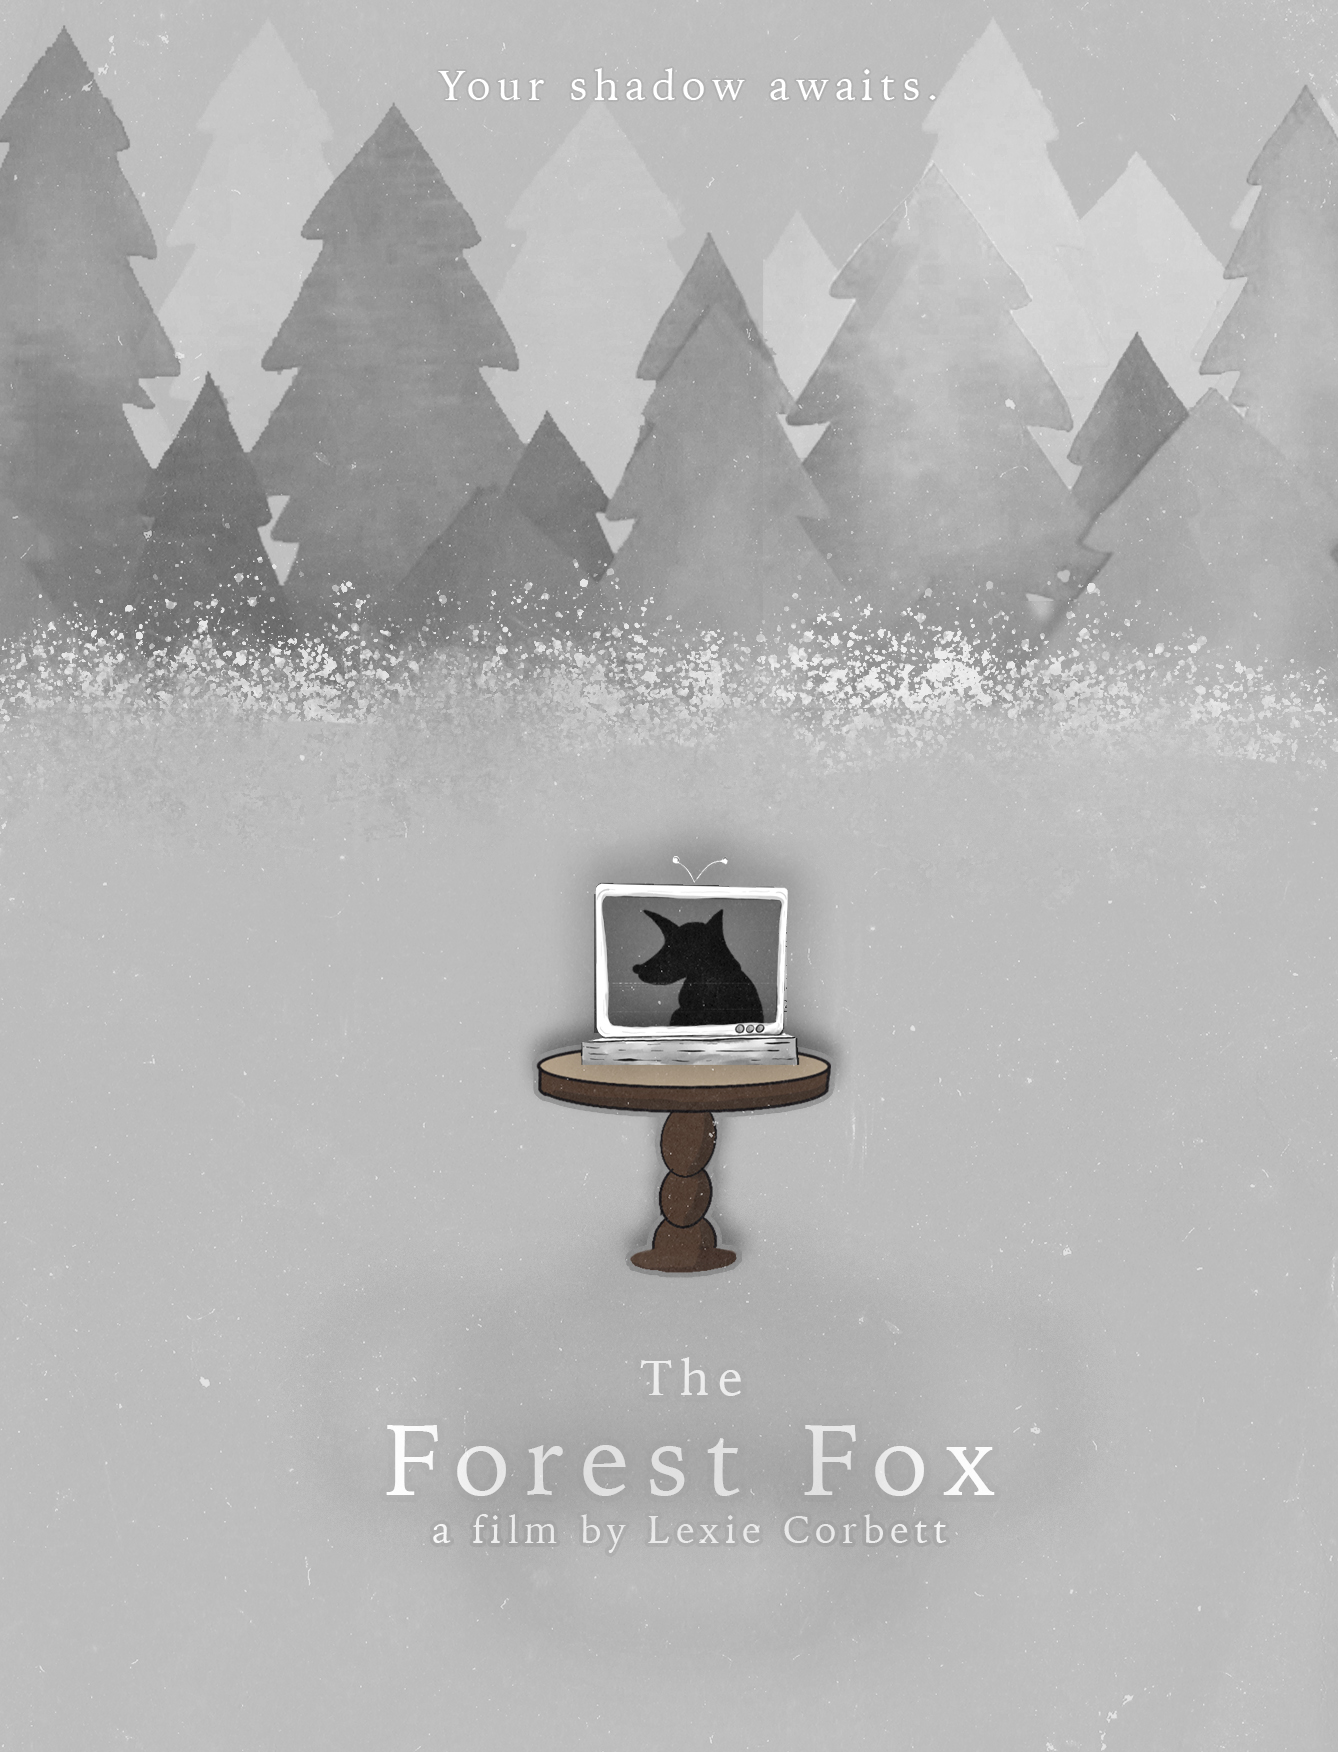 The Forest Fox Film Poster